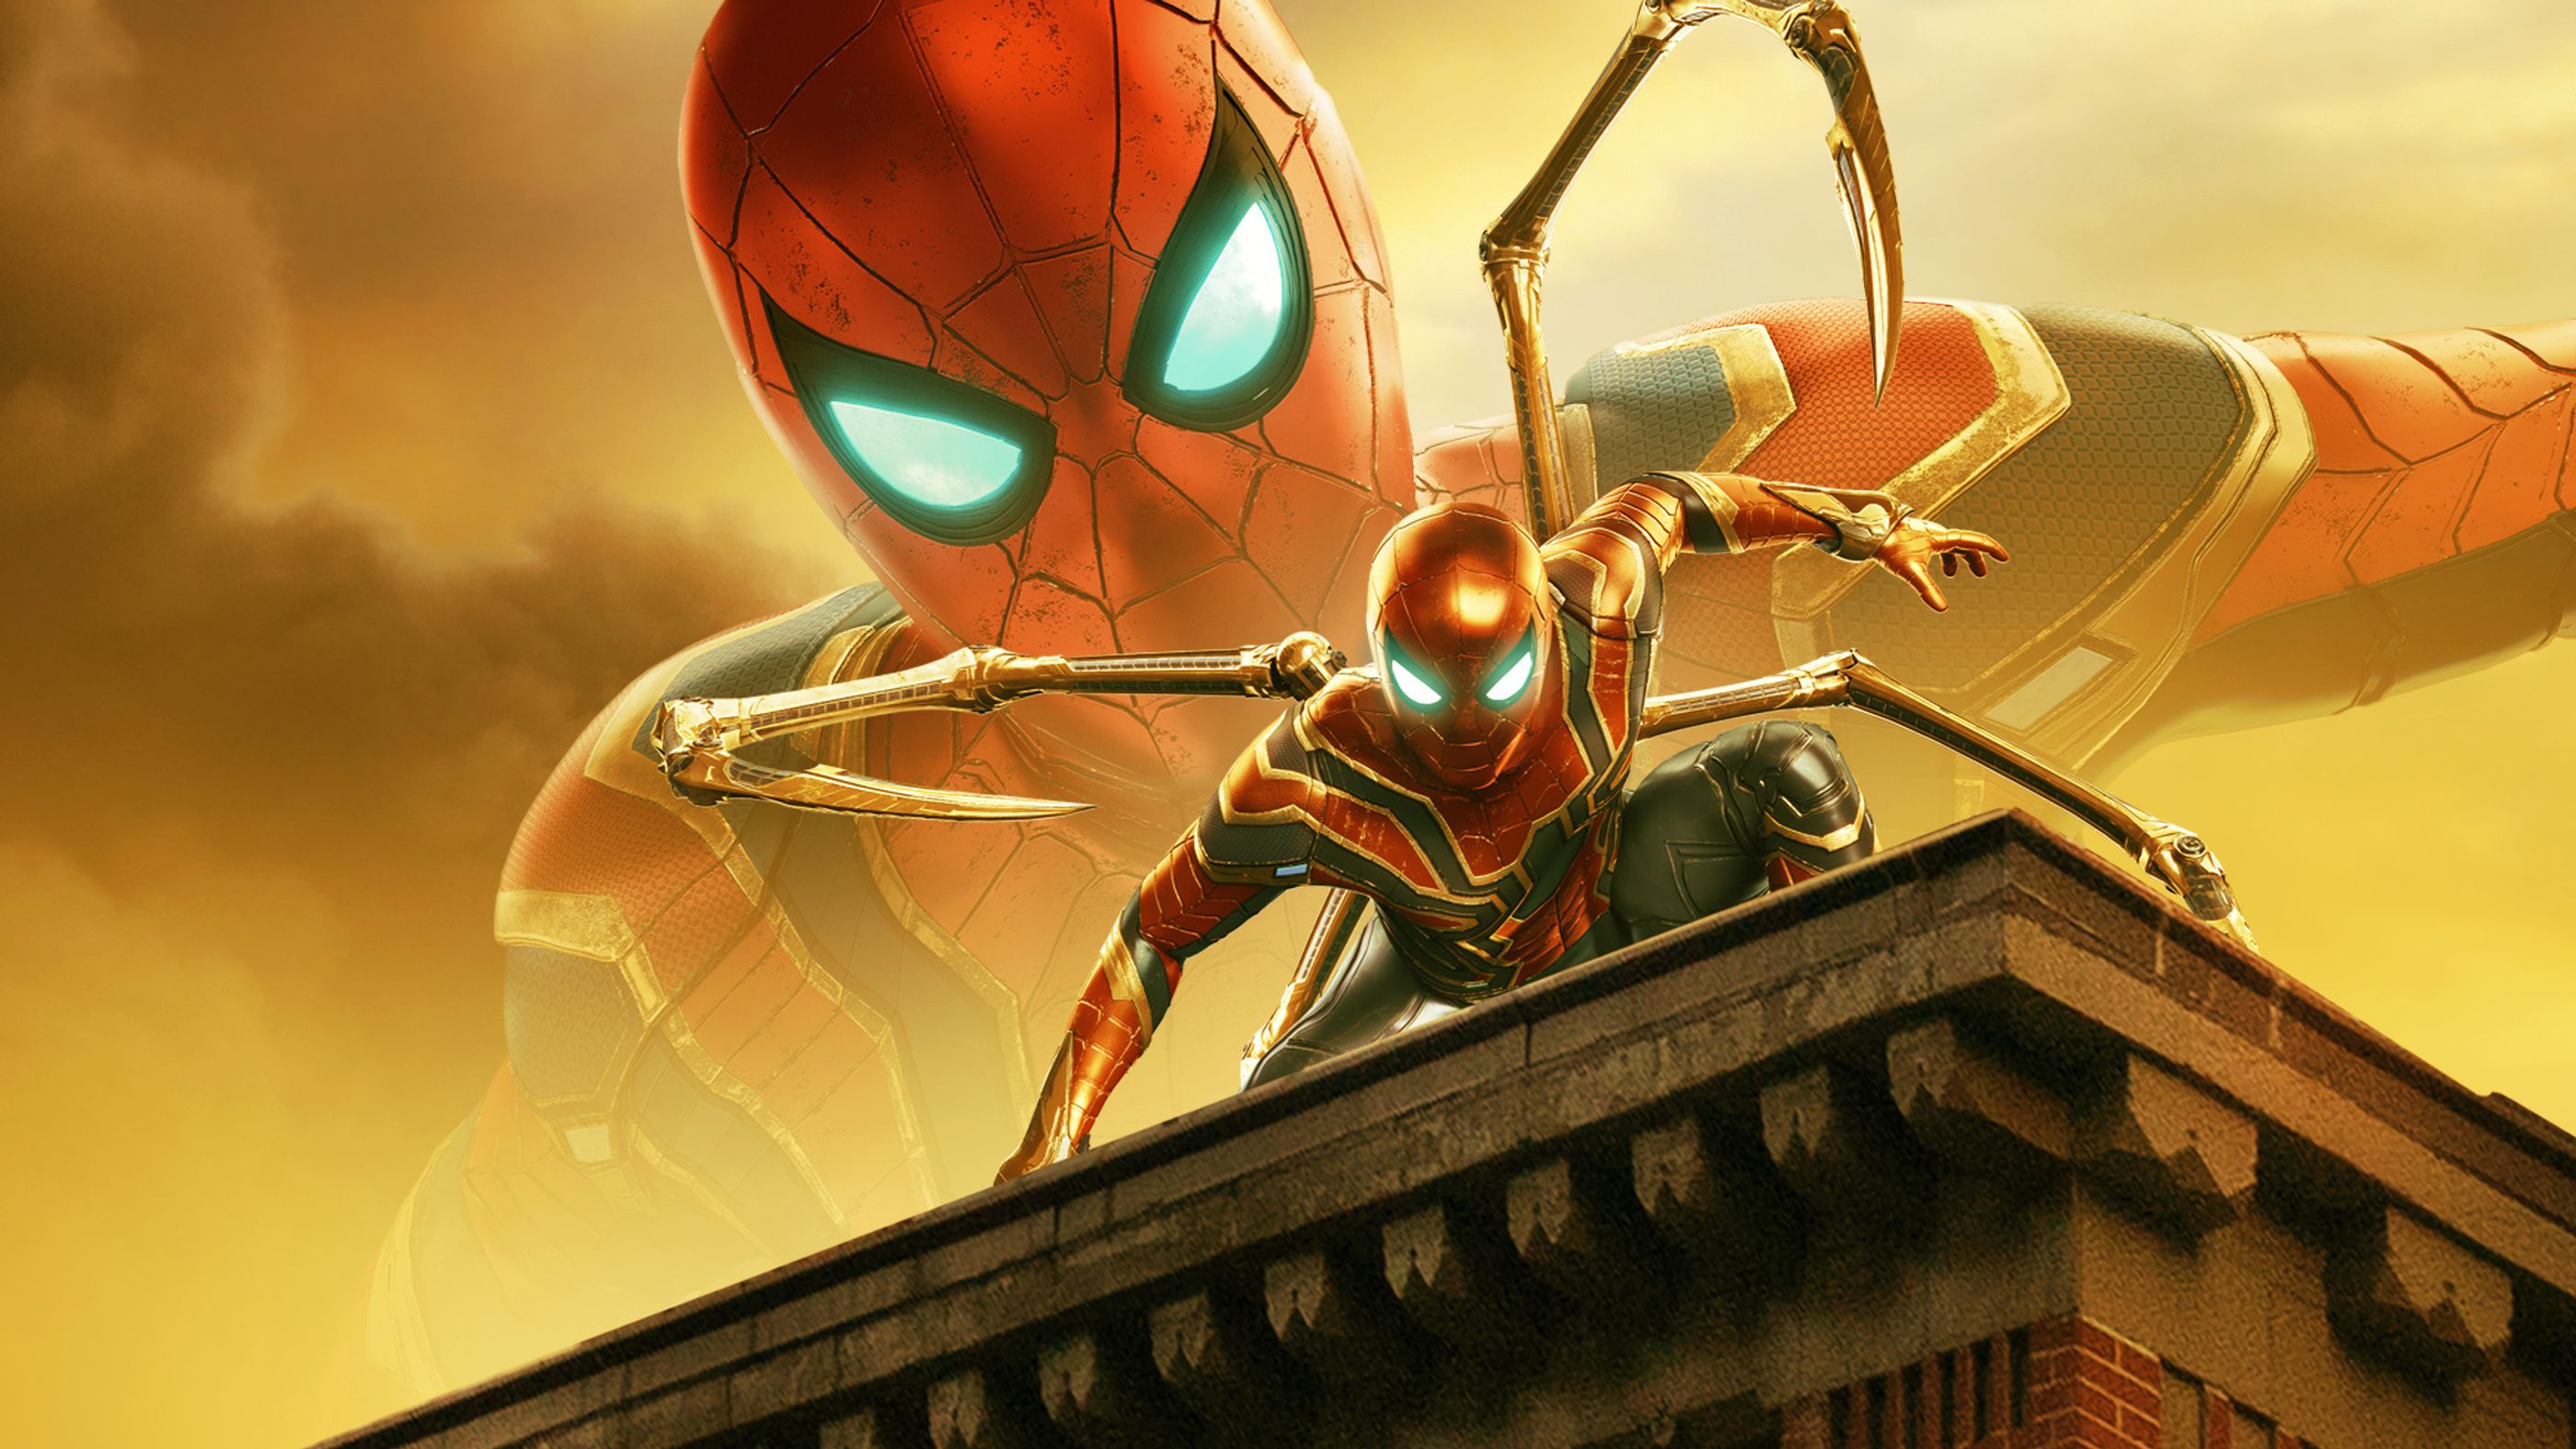 Spider-Man: Far From Home, Where to Stream and Watch